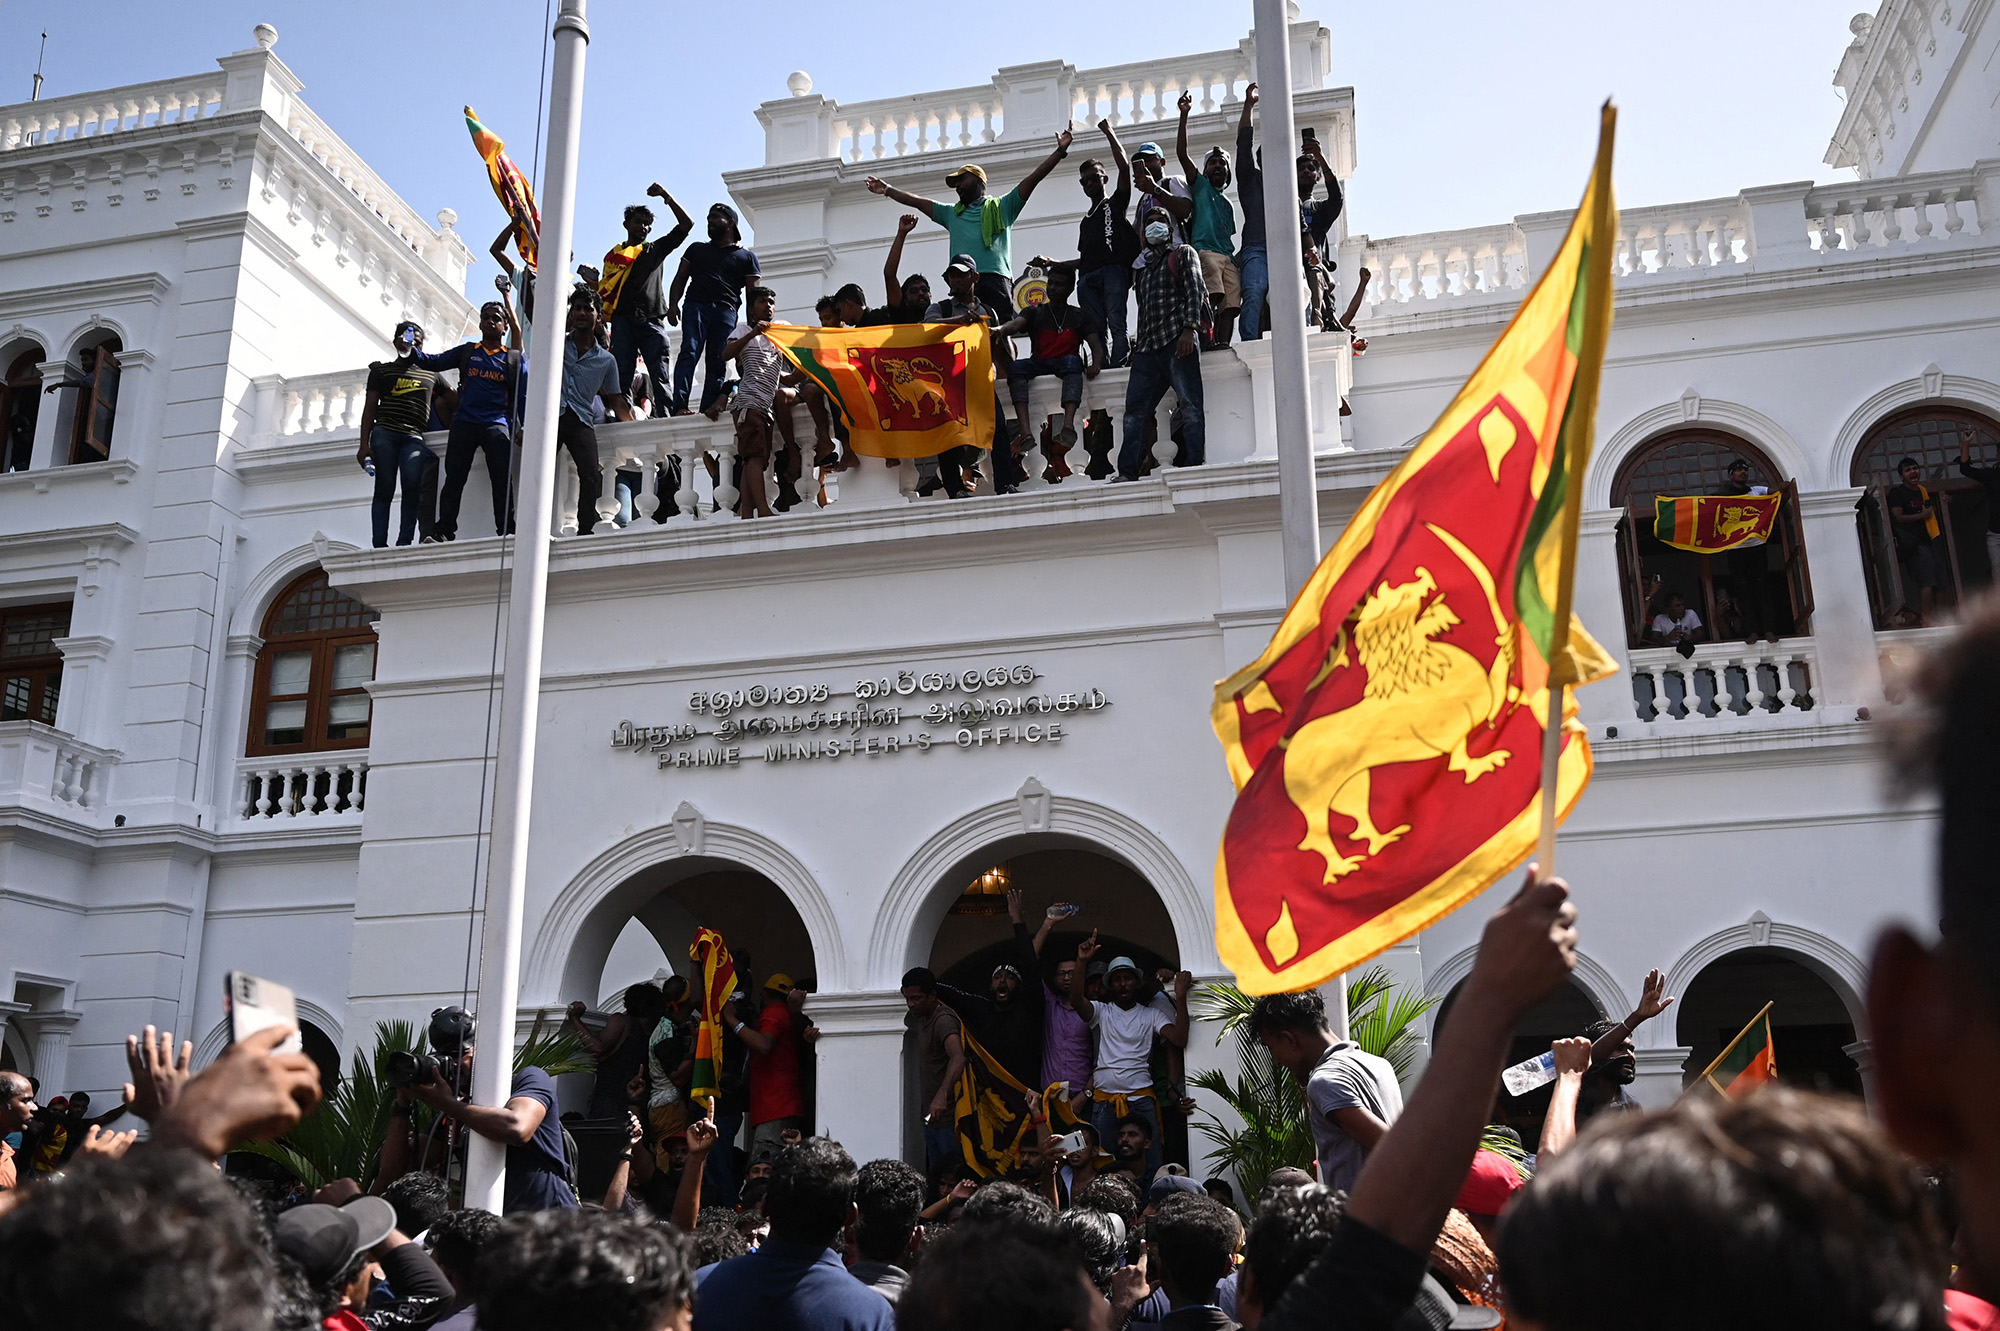 Demonstrators shout slogans and wave Sri Lankan flags during an anti-government protest inside the office building of Sri Lanka's prime minister in Colombo on July 13.